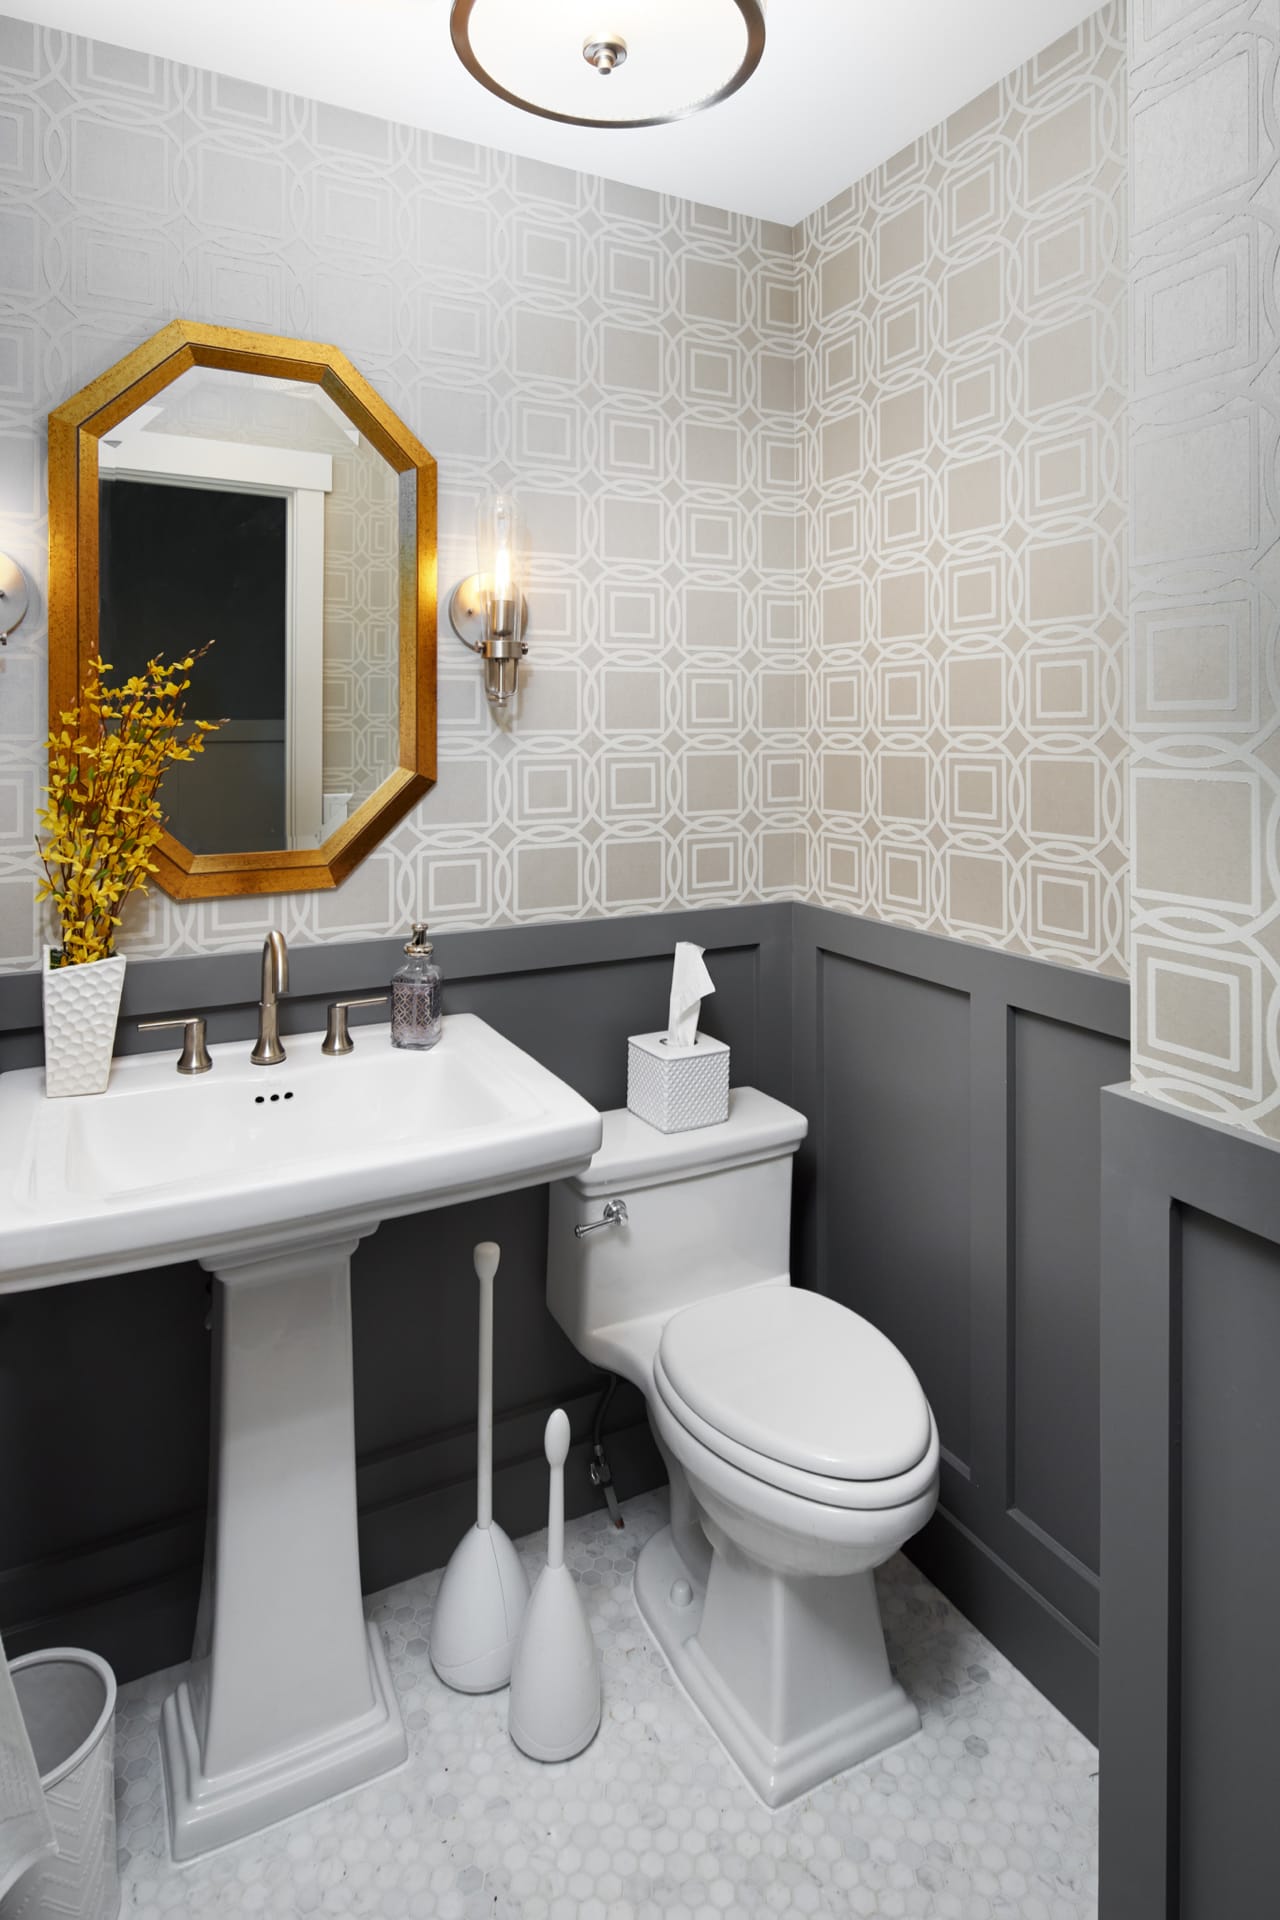 A half bathroom with grey wall paneling, geometric wallpaper and a gold mirror.